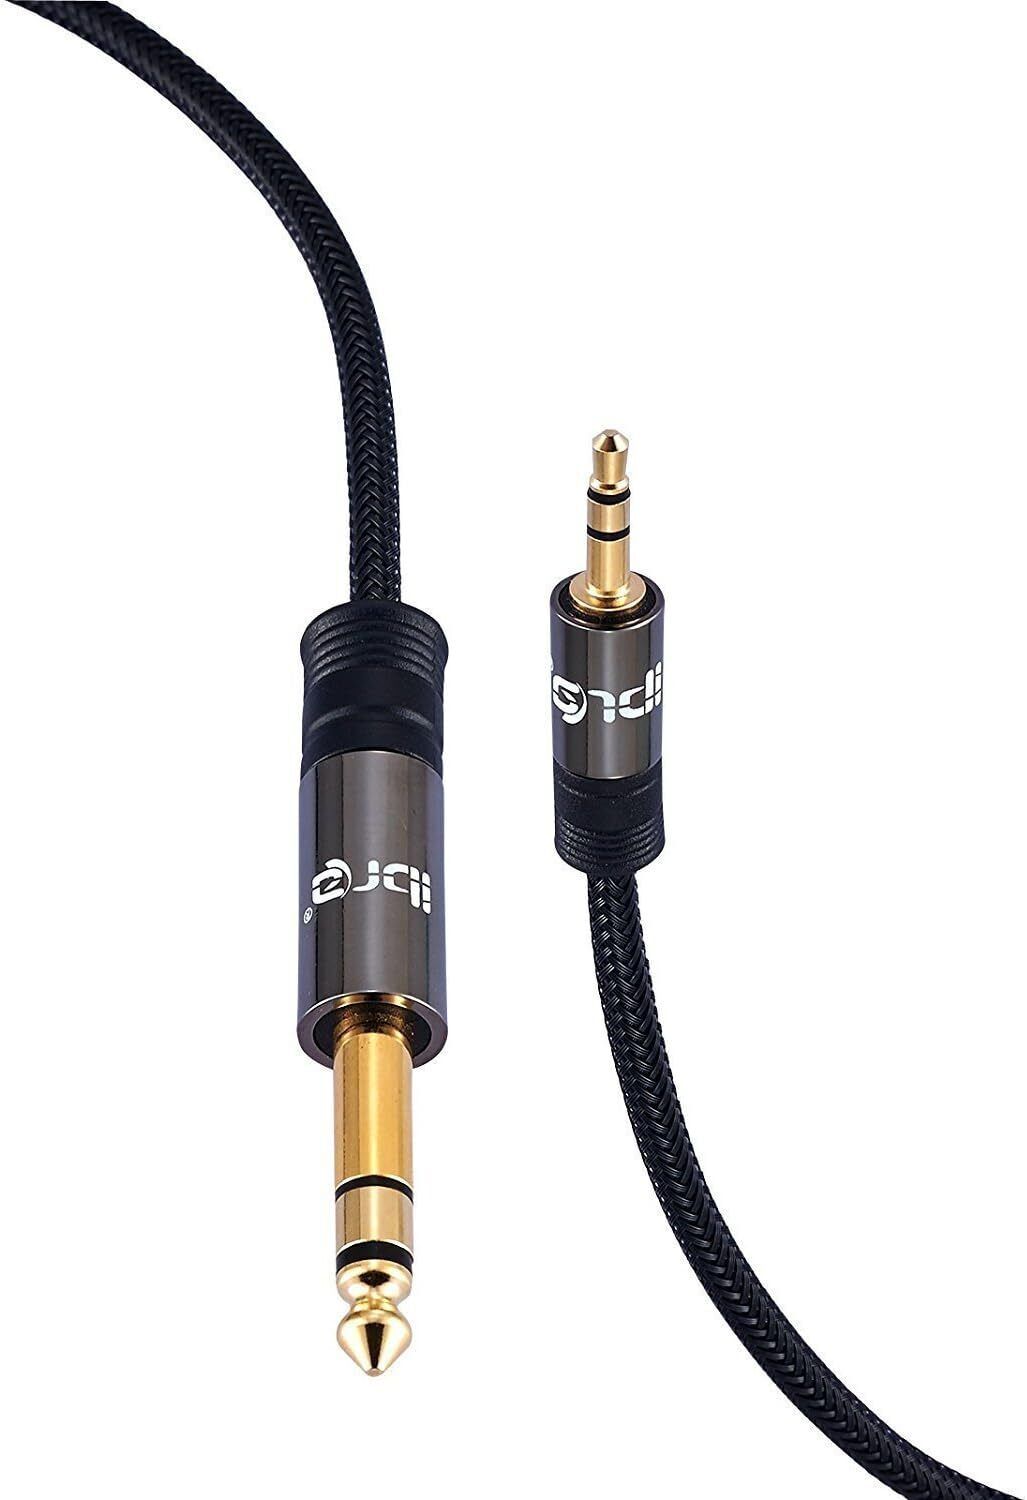 3.5mm to 6.35mm 1/4 inch Small to Big Mono Jack Audio Cable Plug Patch Lead Amp - 7.5M